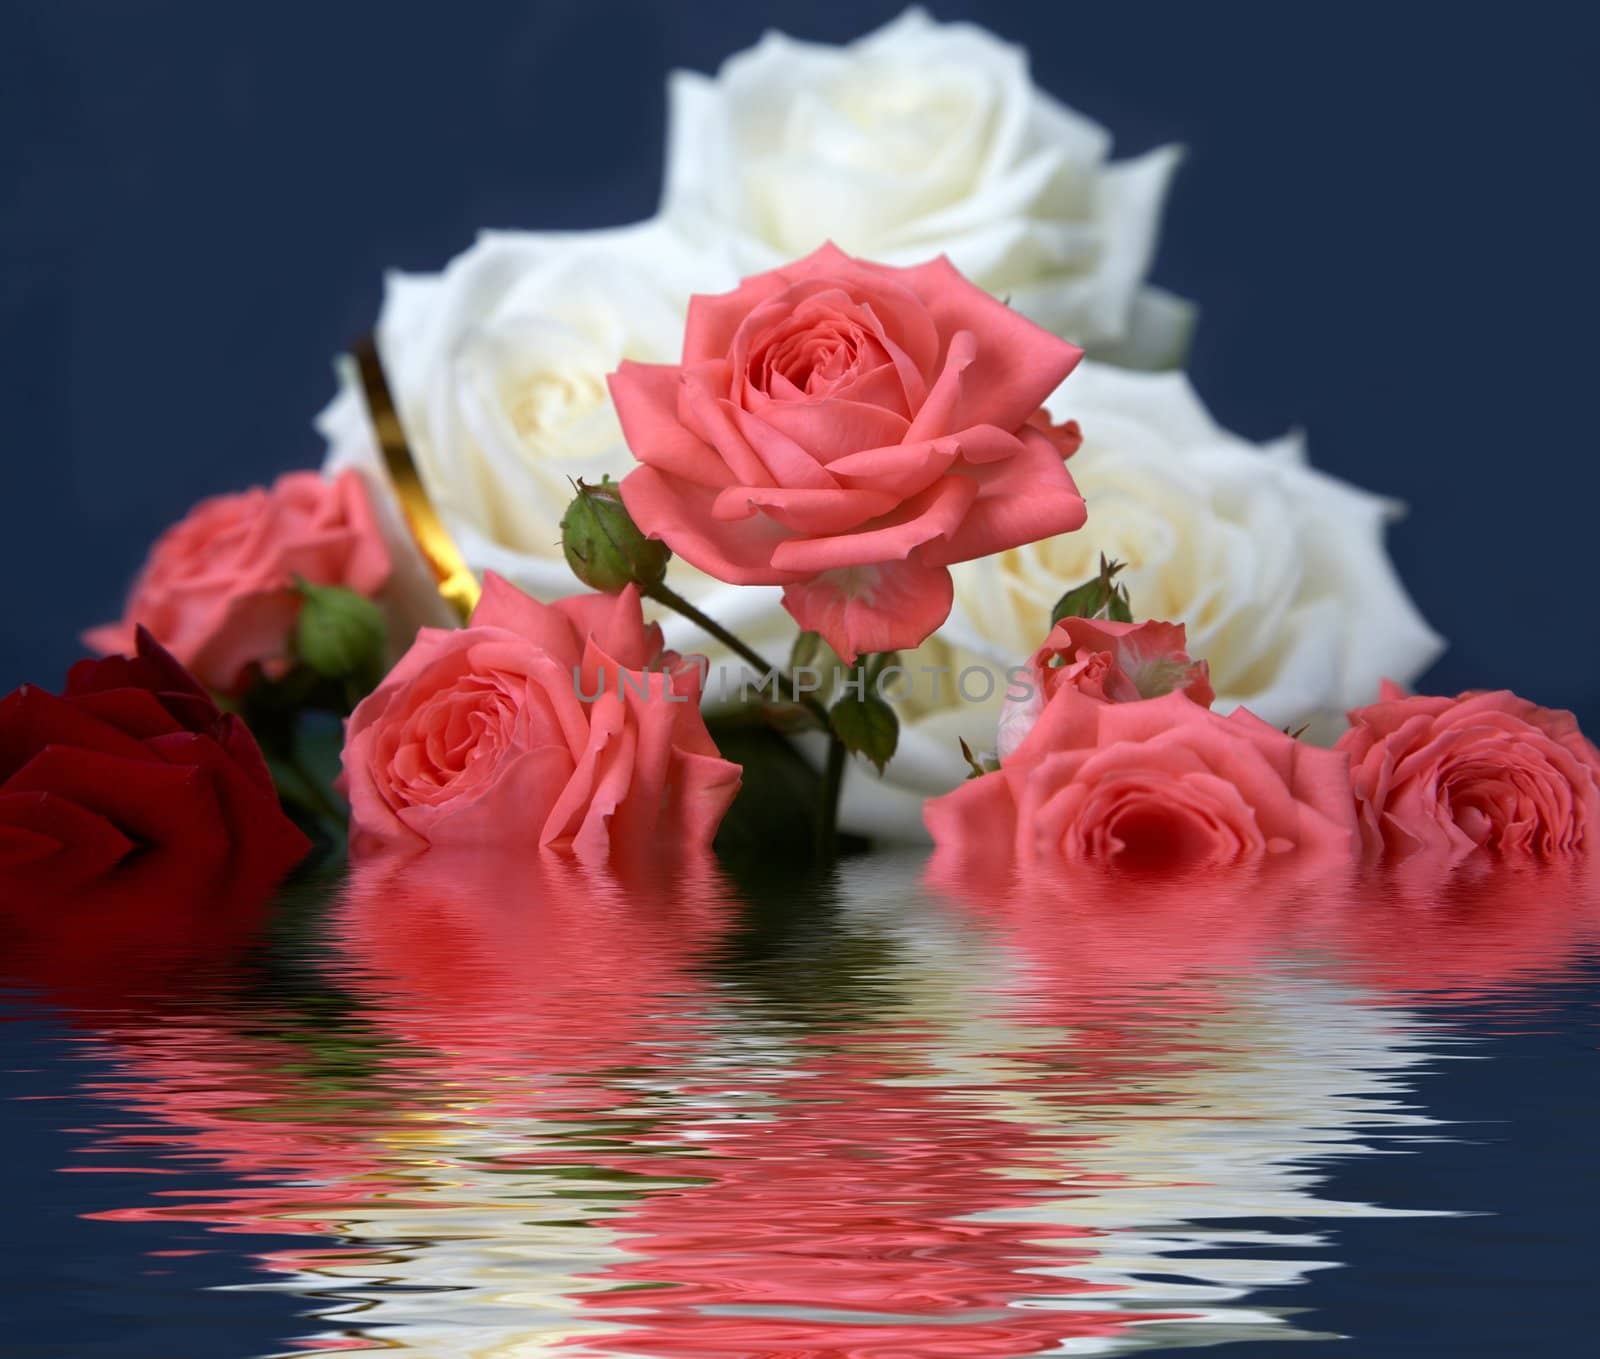 An image of pink and white roses in water